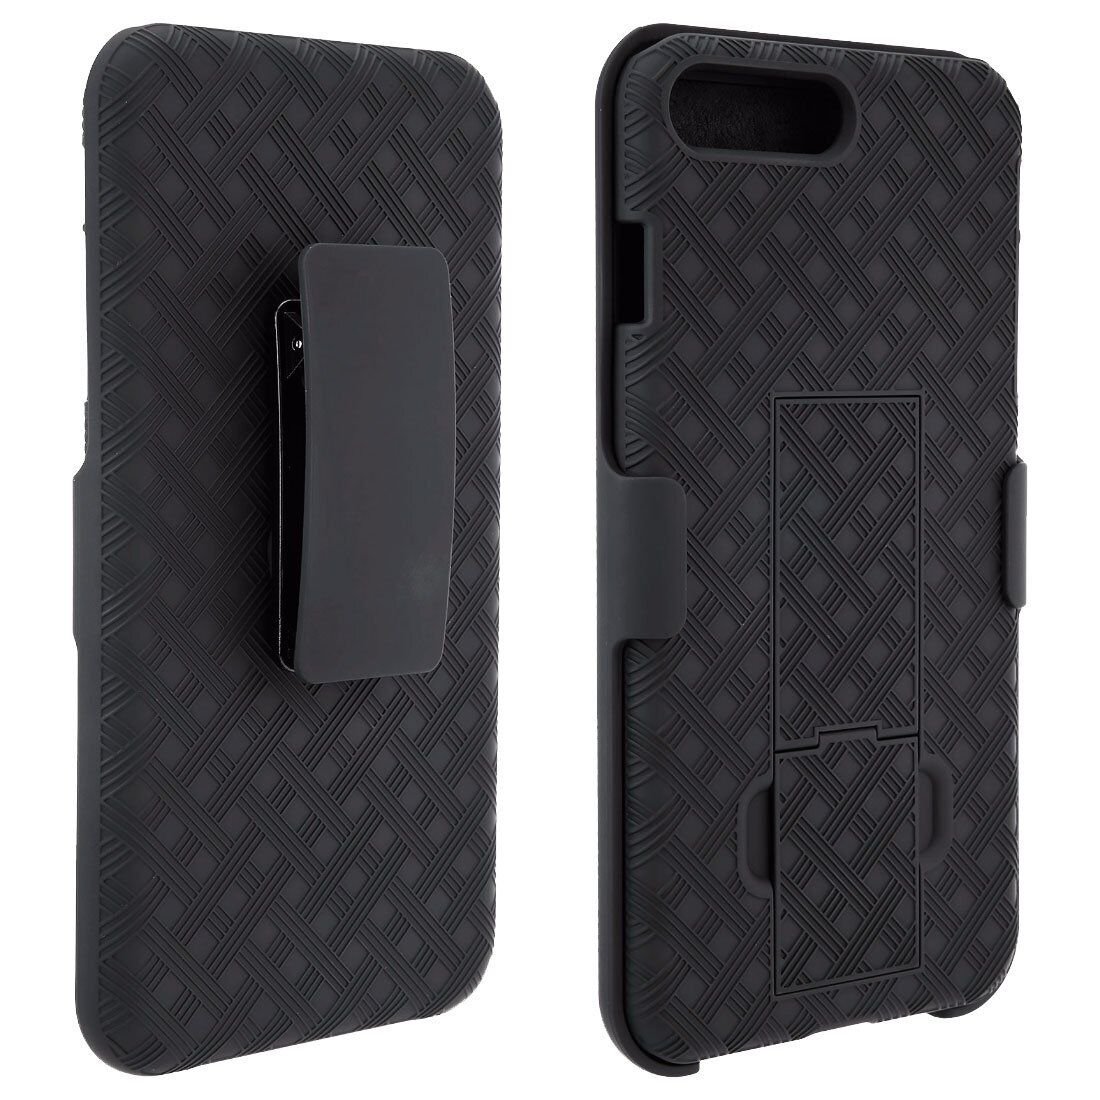 Verizon Shell Holster Combo Case with Kickstand for Apple iPhone 8/7/6/6s -